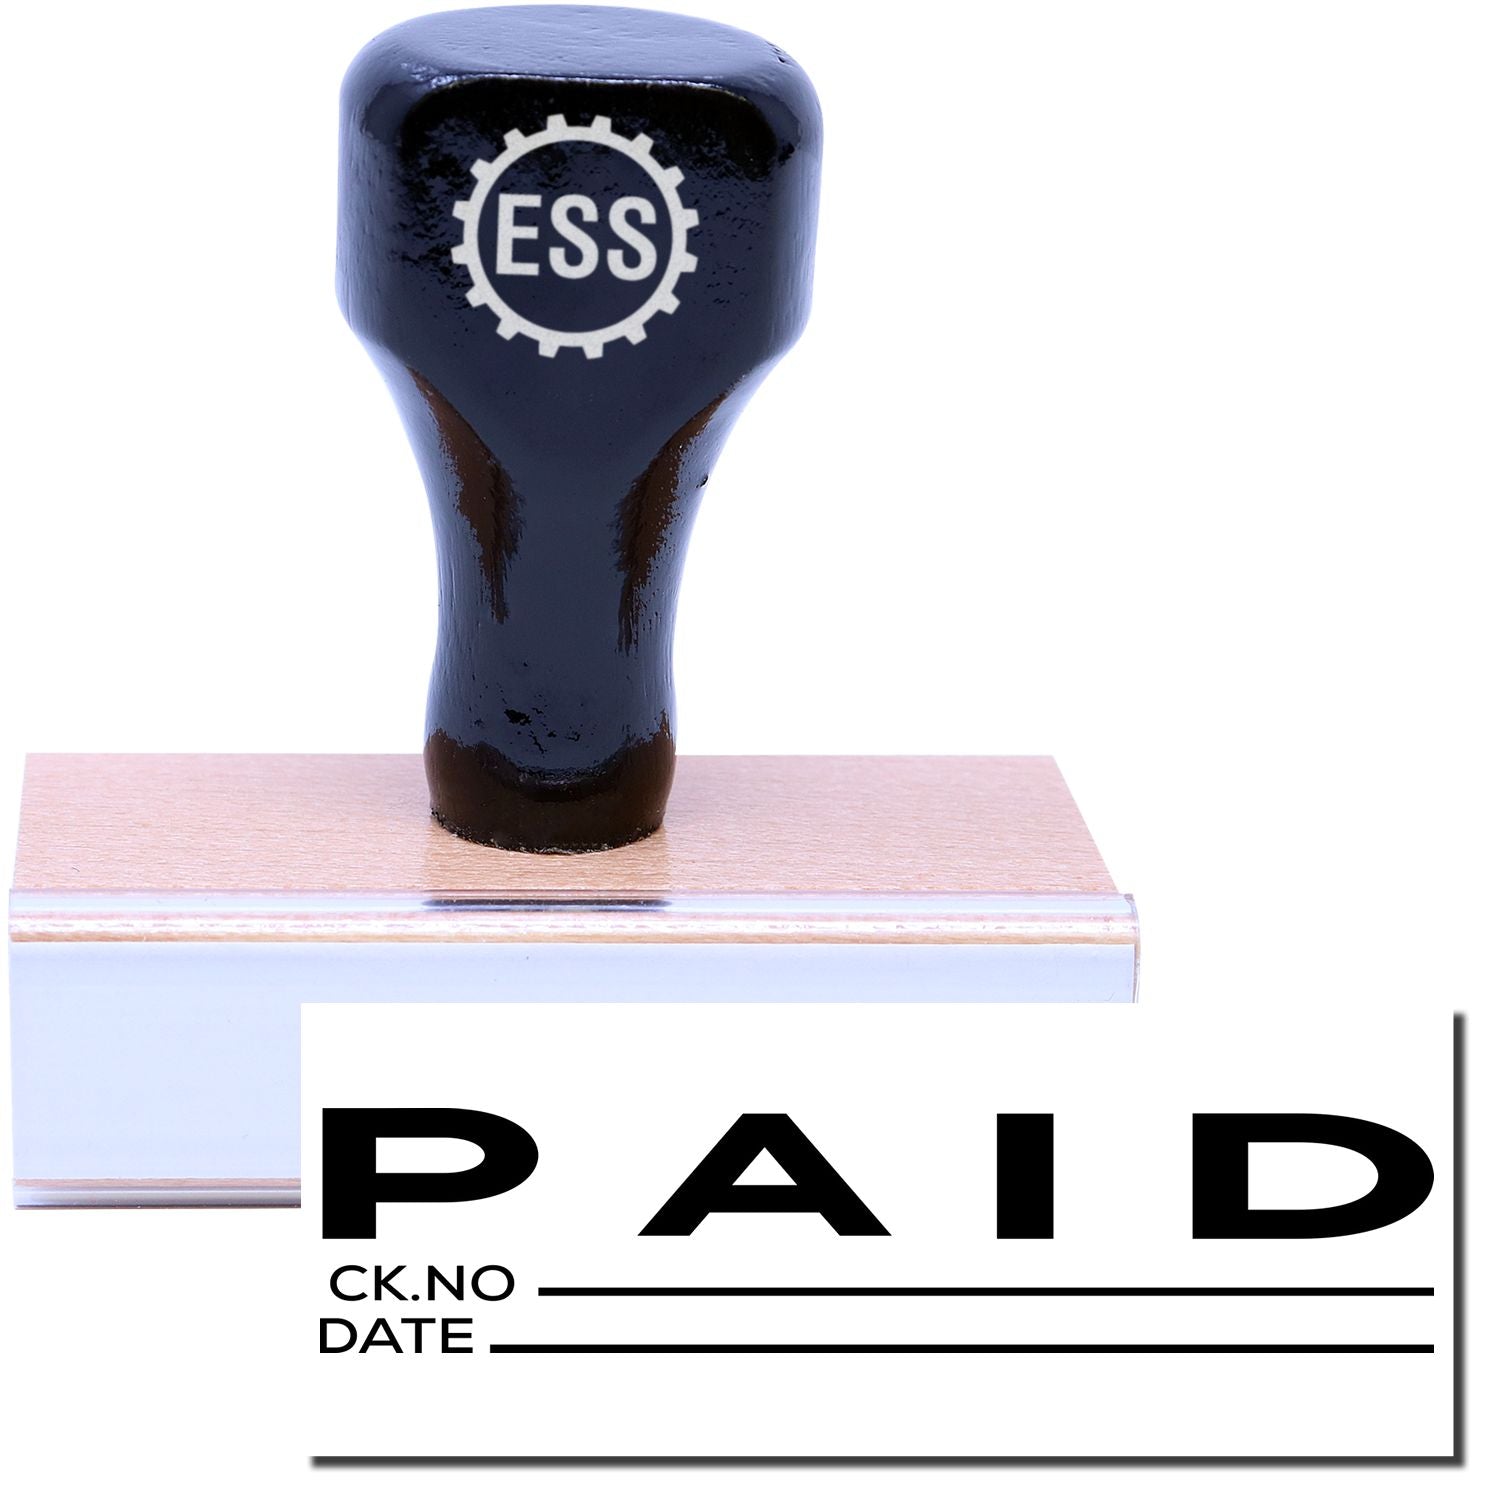 A stock office rubber stamp with a stamped image showing how the text "PAID" with a space to write down the check number and date of payment is displayed after stamping.